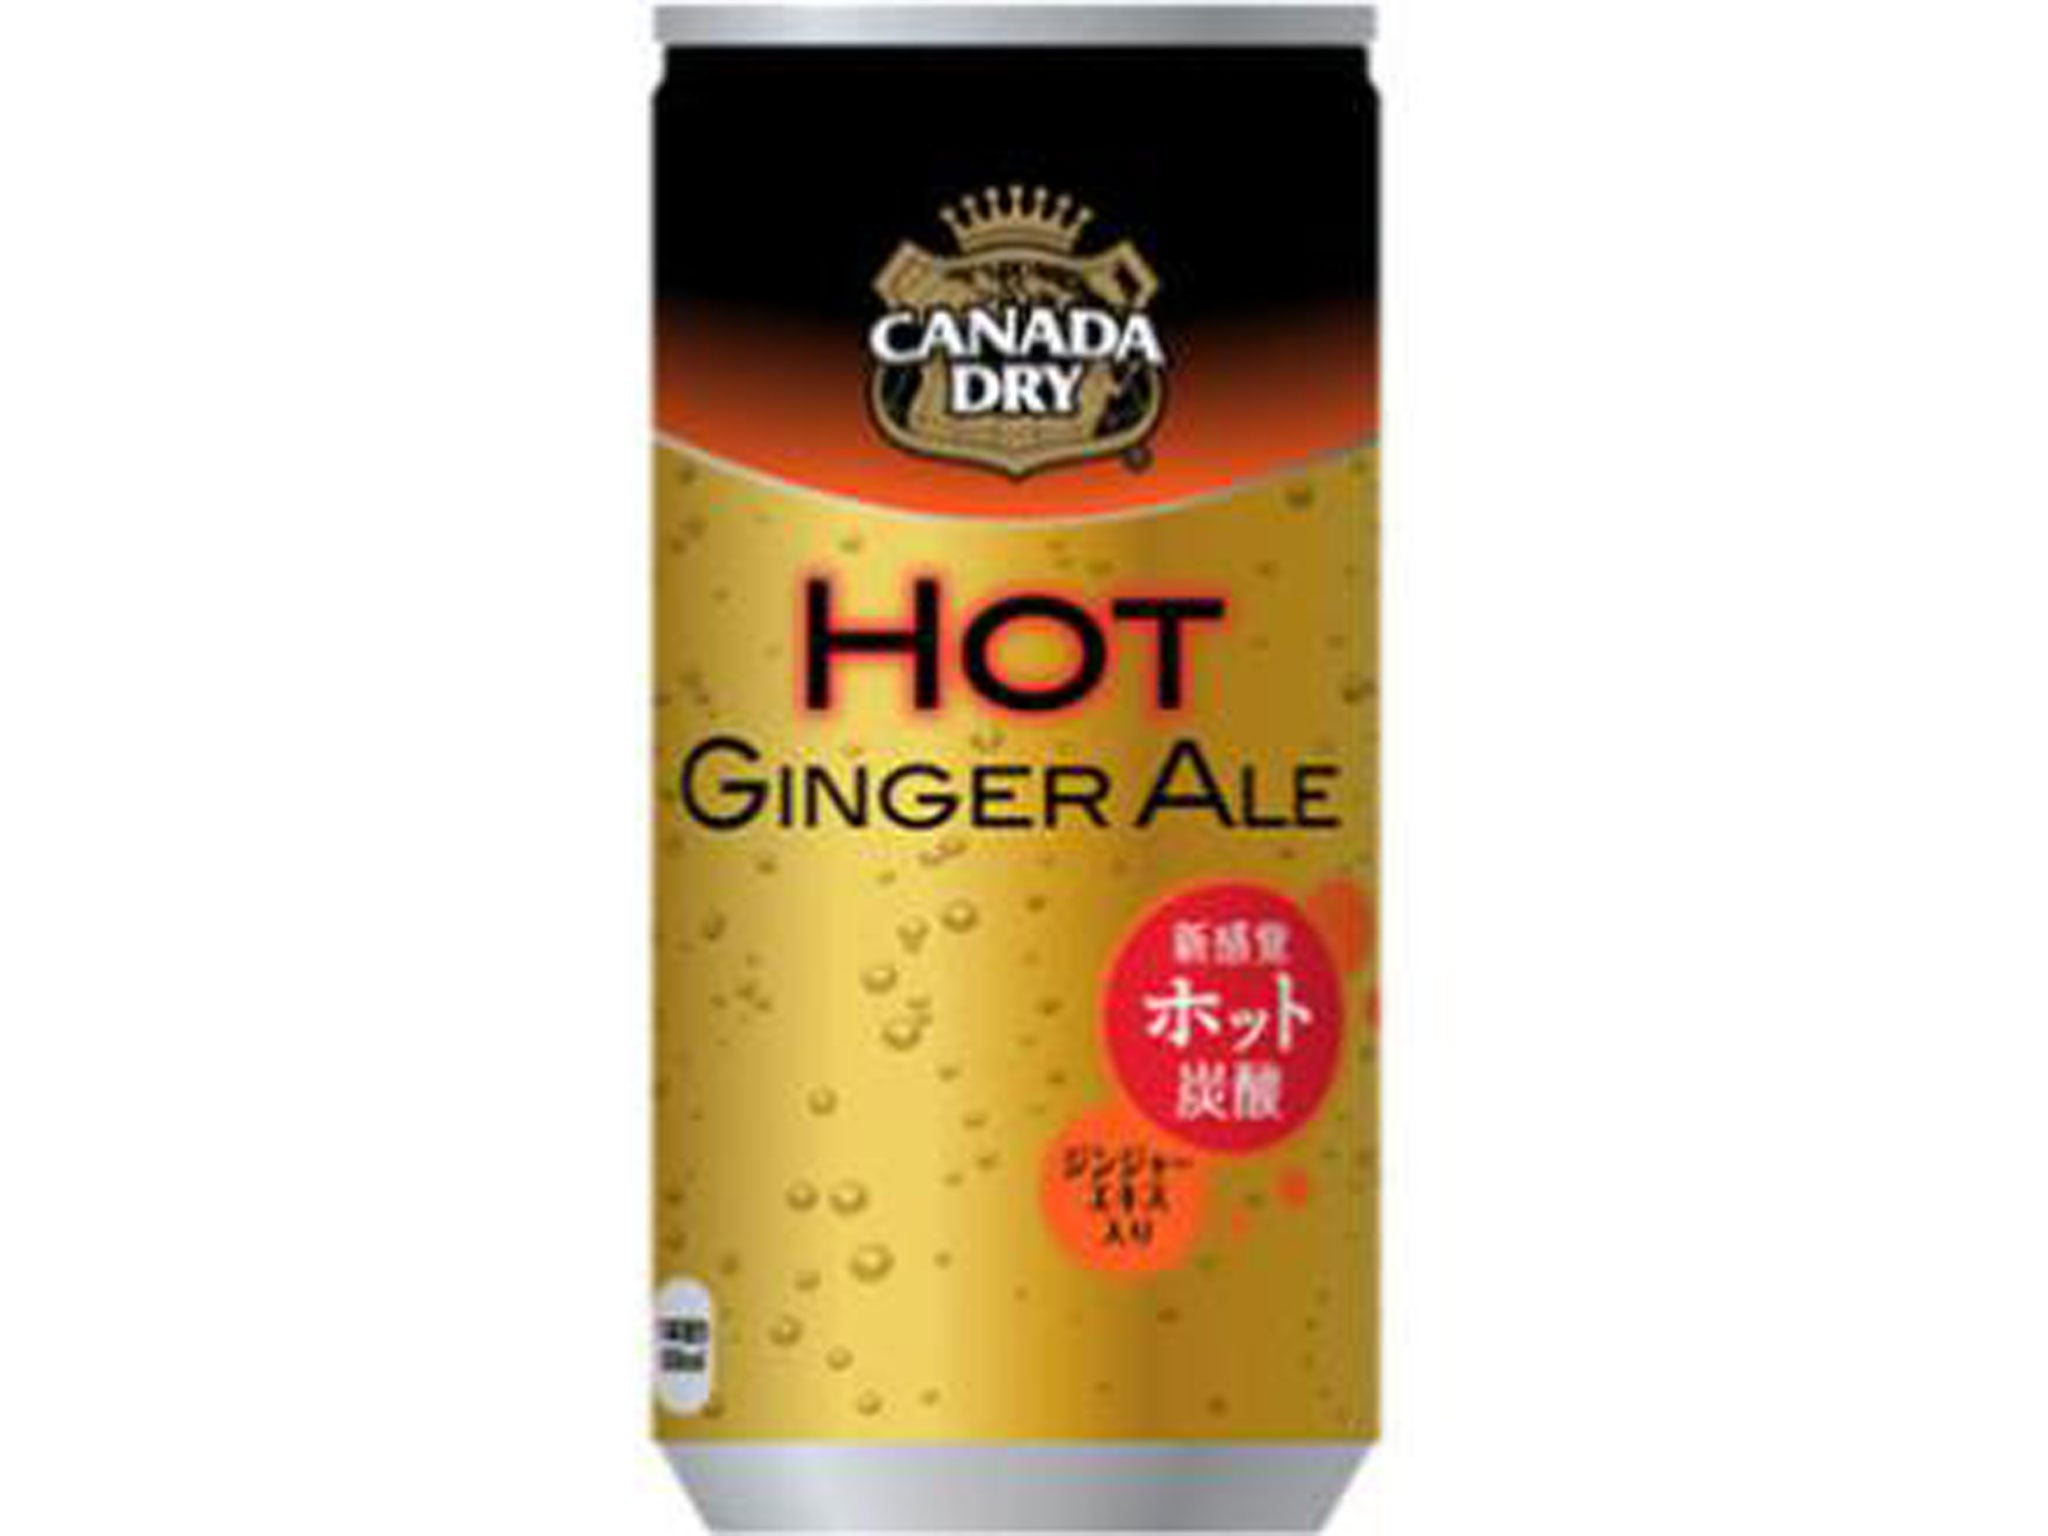 In a world first, Coca-cola Japan has launched a new drink - Canada Dry Ginger Ale - that is both heated and fizzy